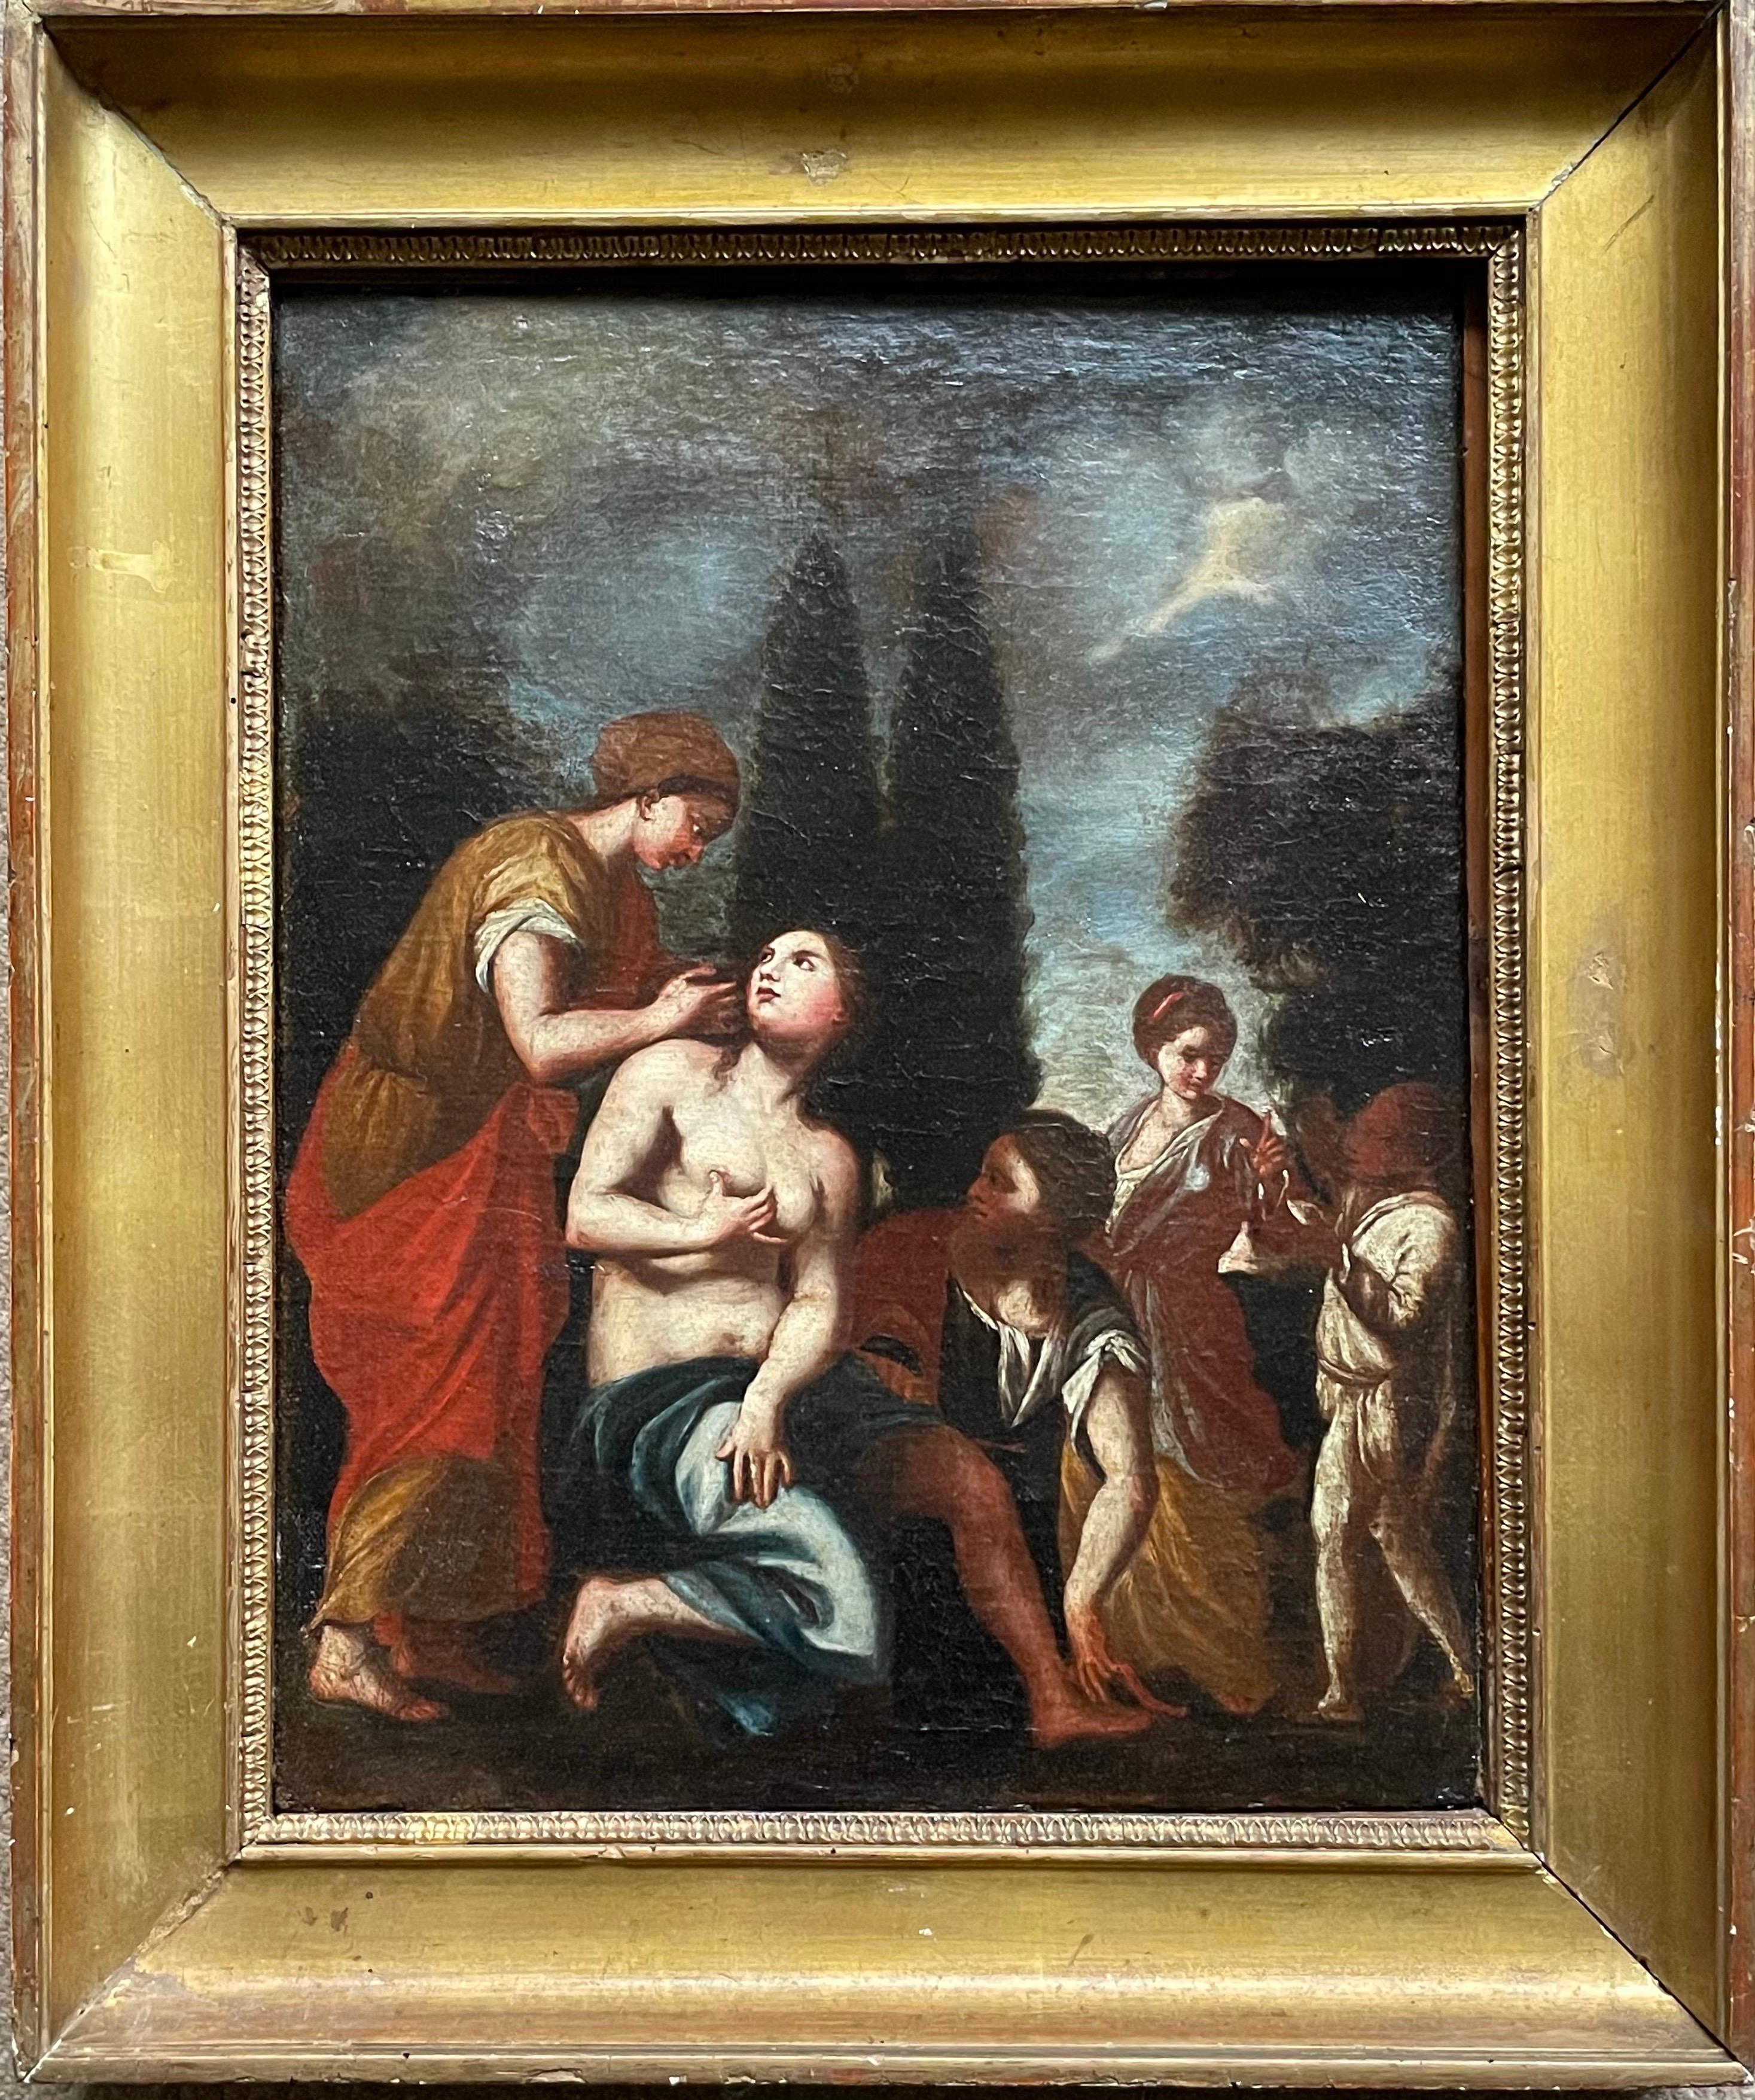 FINE 17TH CENTURY ITALIAN OLD MASTER OIL ON CANVAS - THE BATHING OF BATHSHEBA - Painting by Unknown